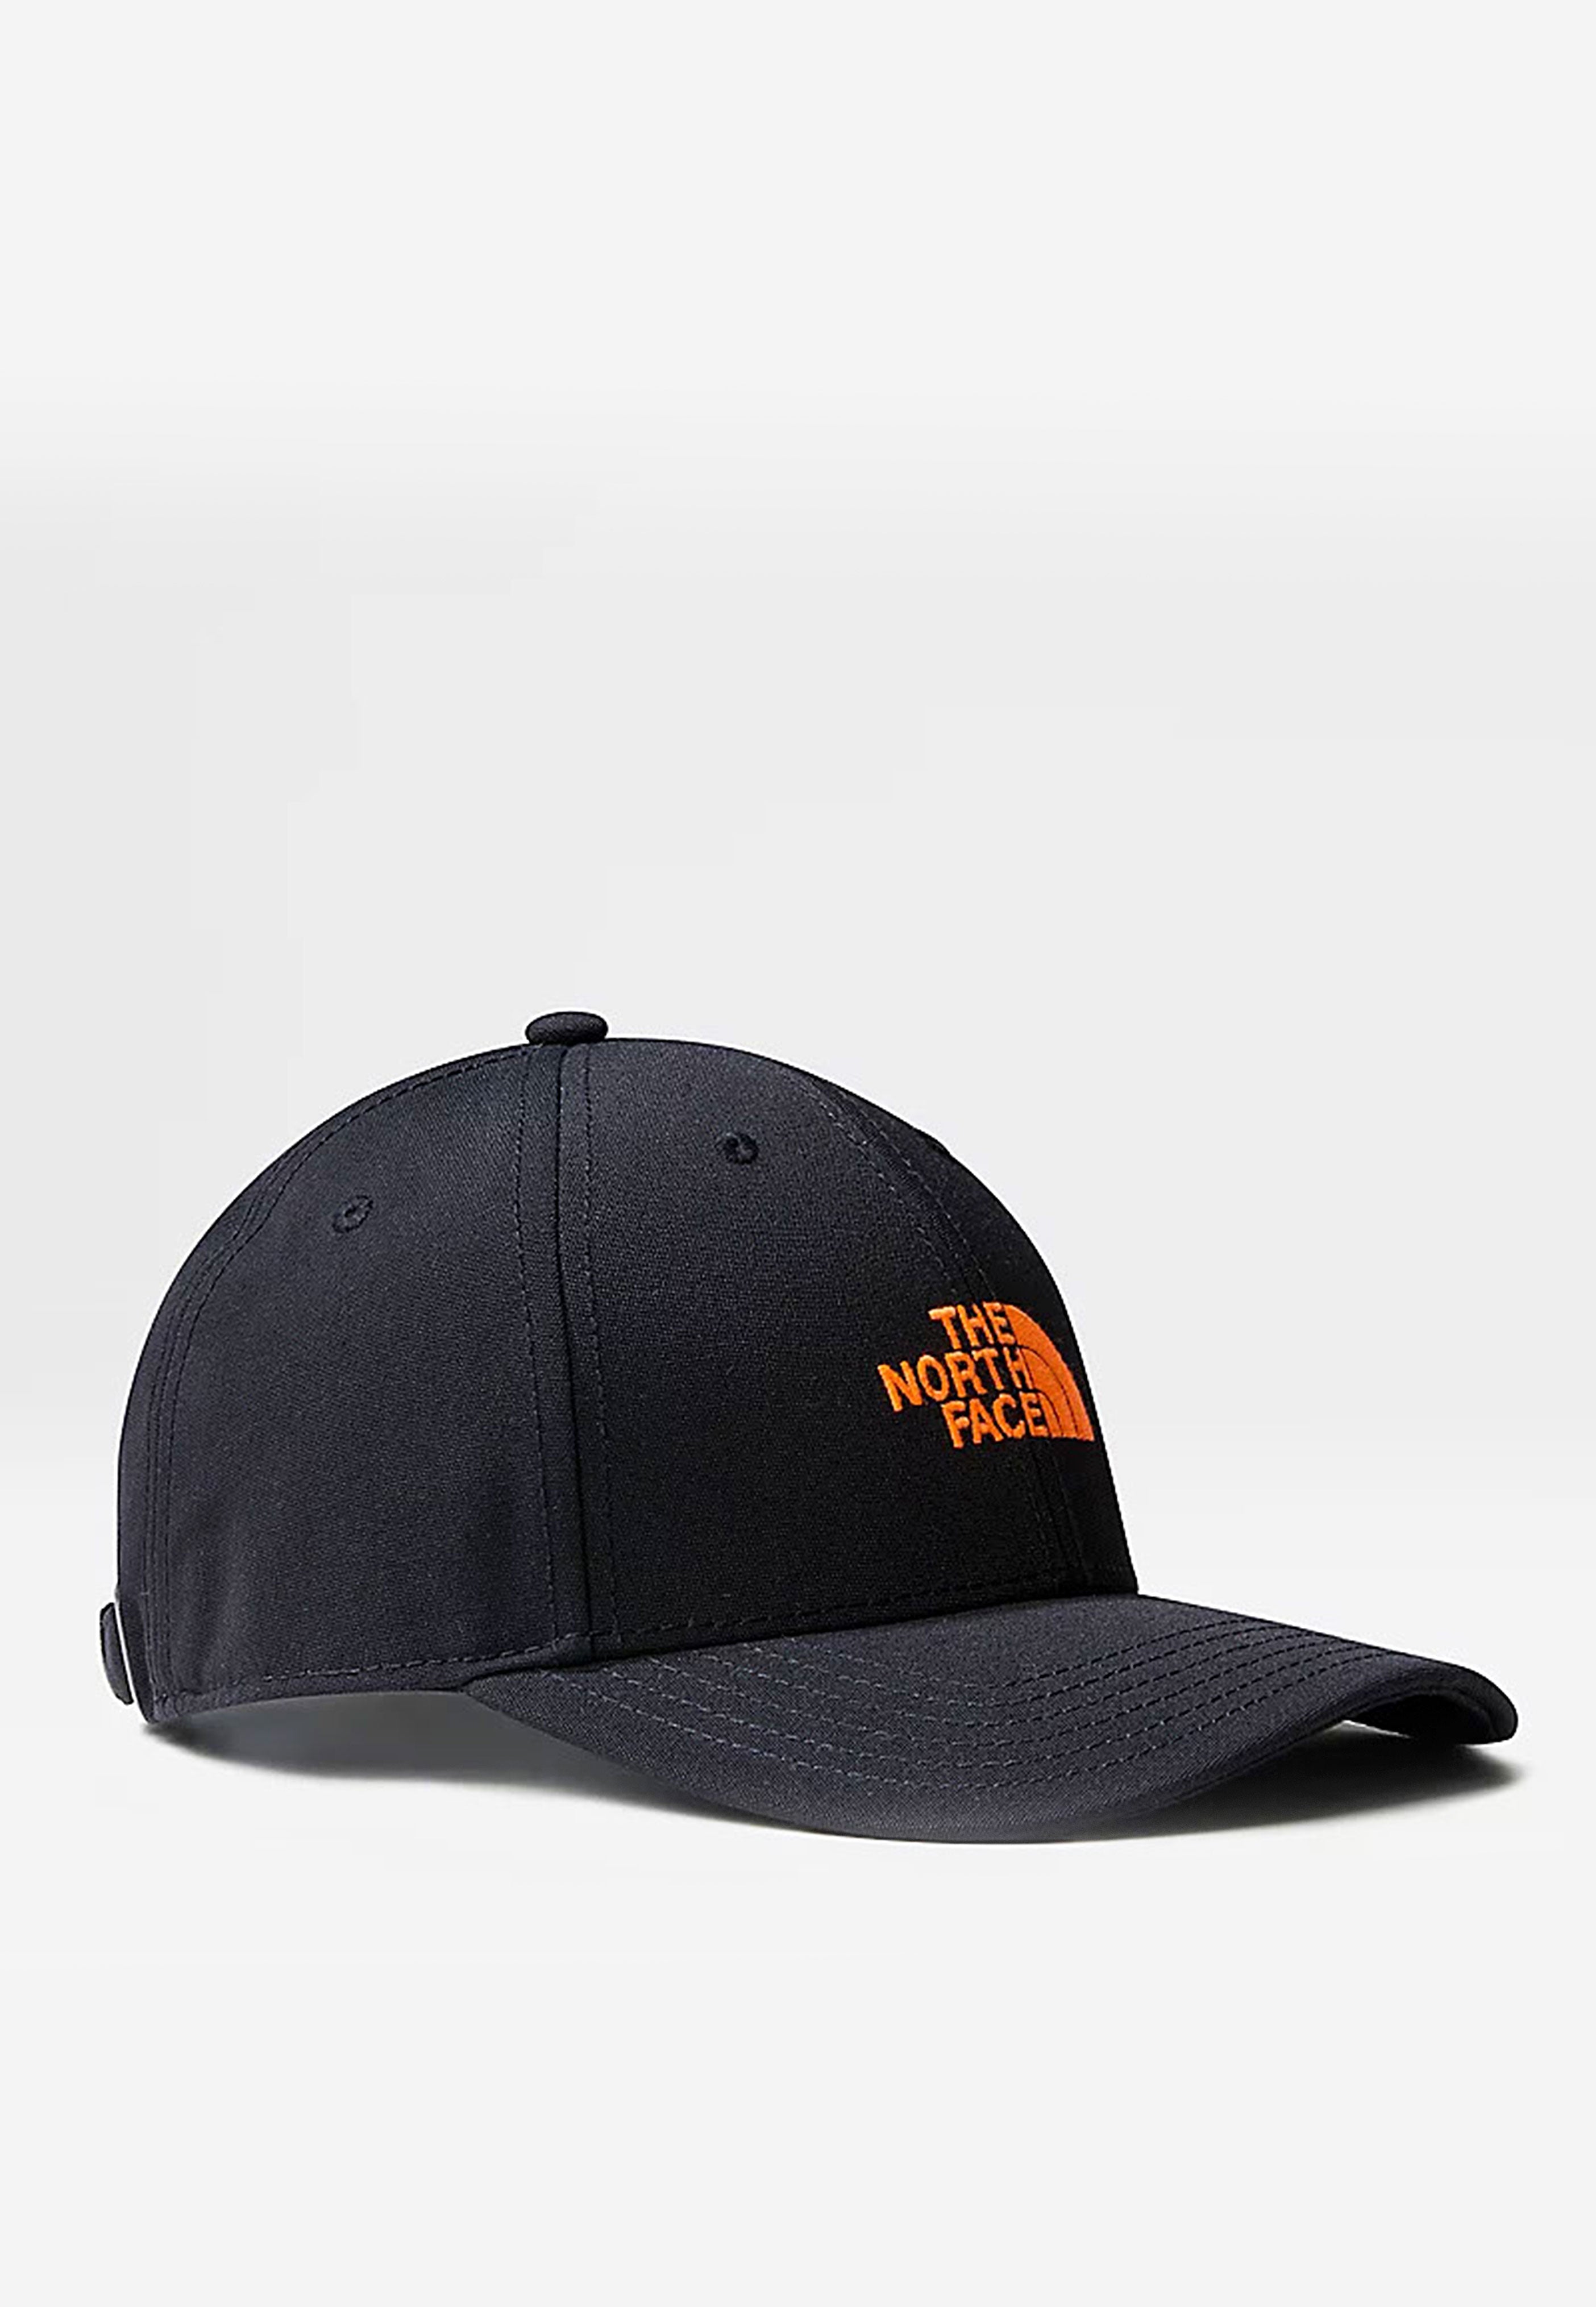 The North Face - Recycled 66 Classic Tnf Black/Vivid Flame - Cap 